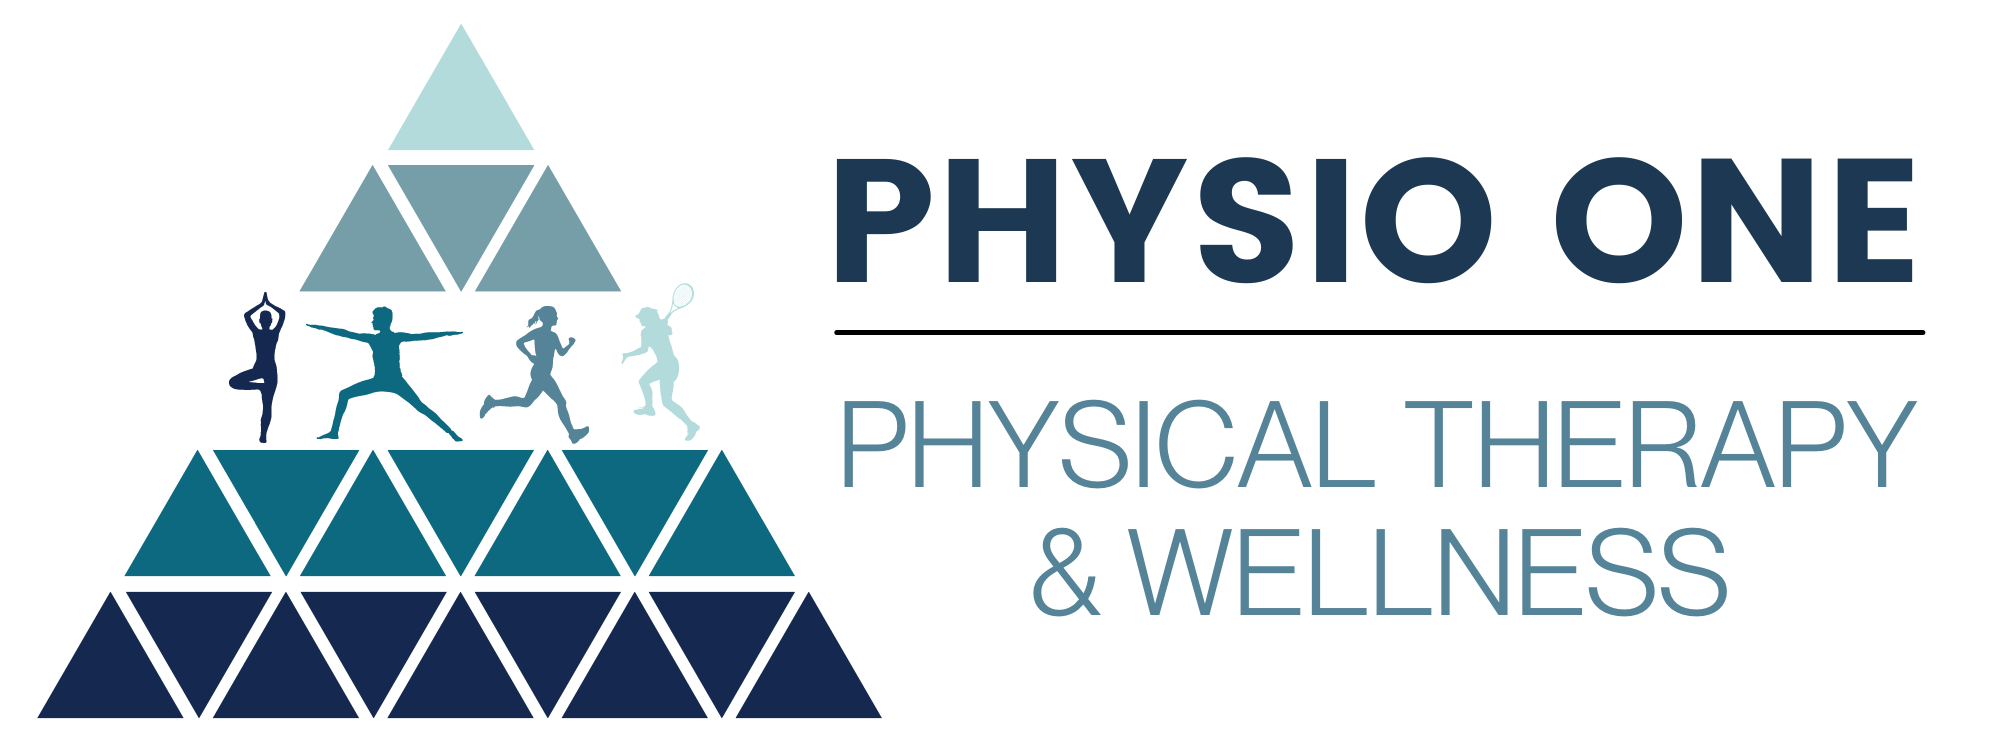 Physio One Physical Therapy & Wellness